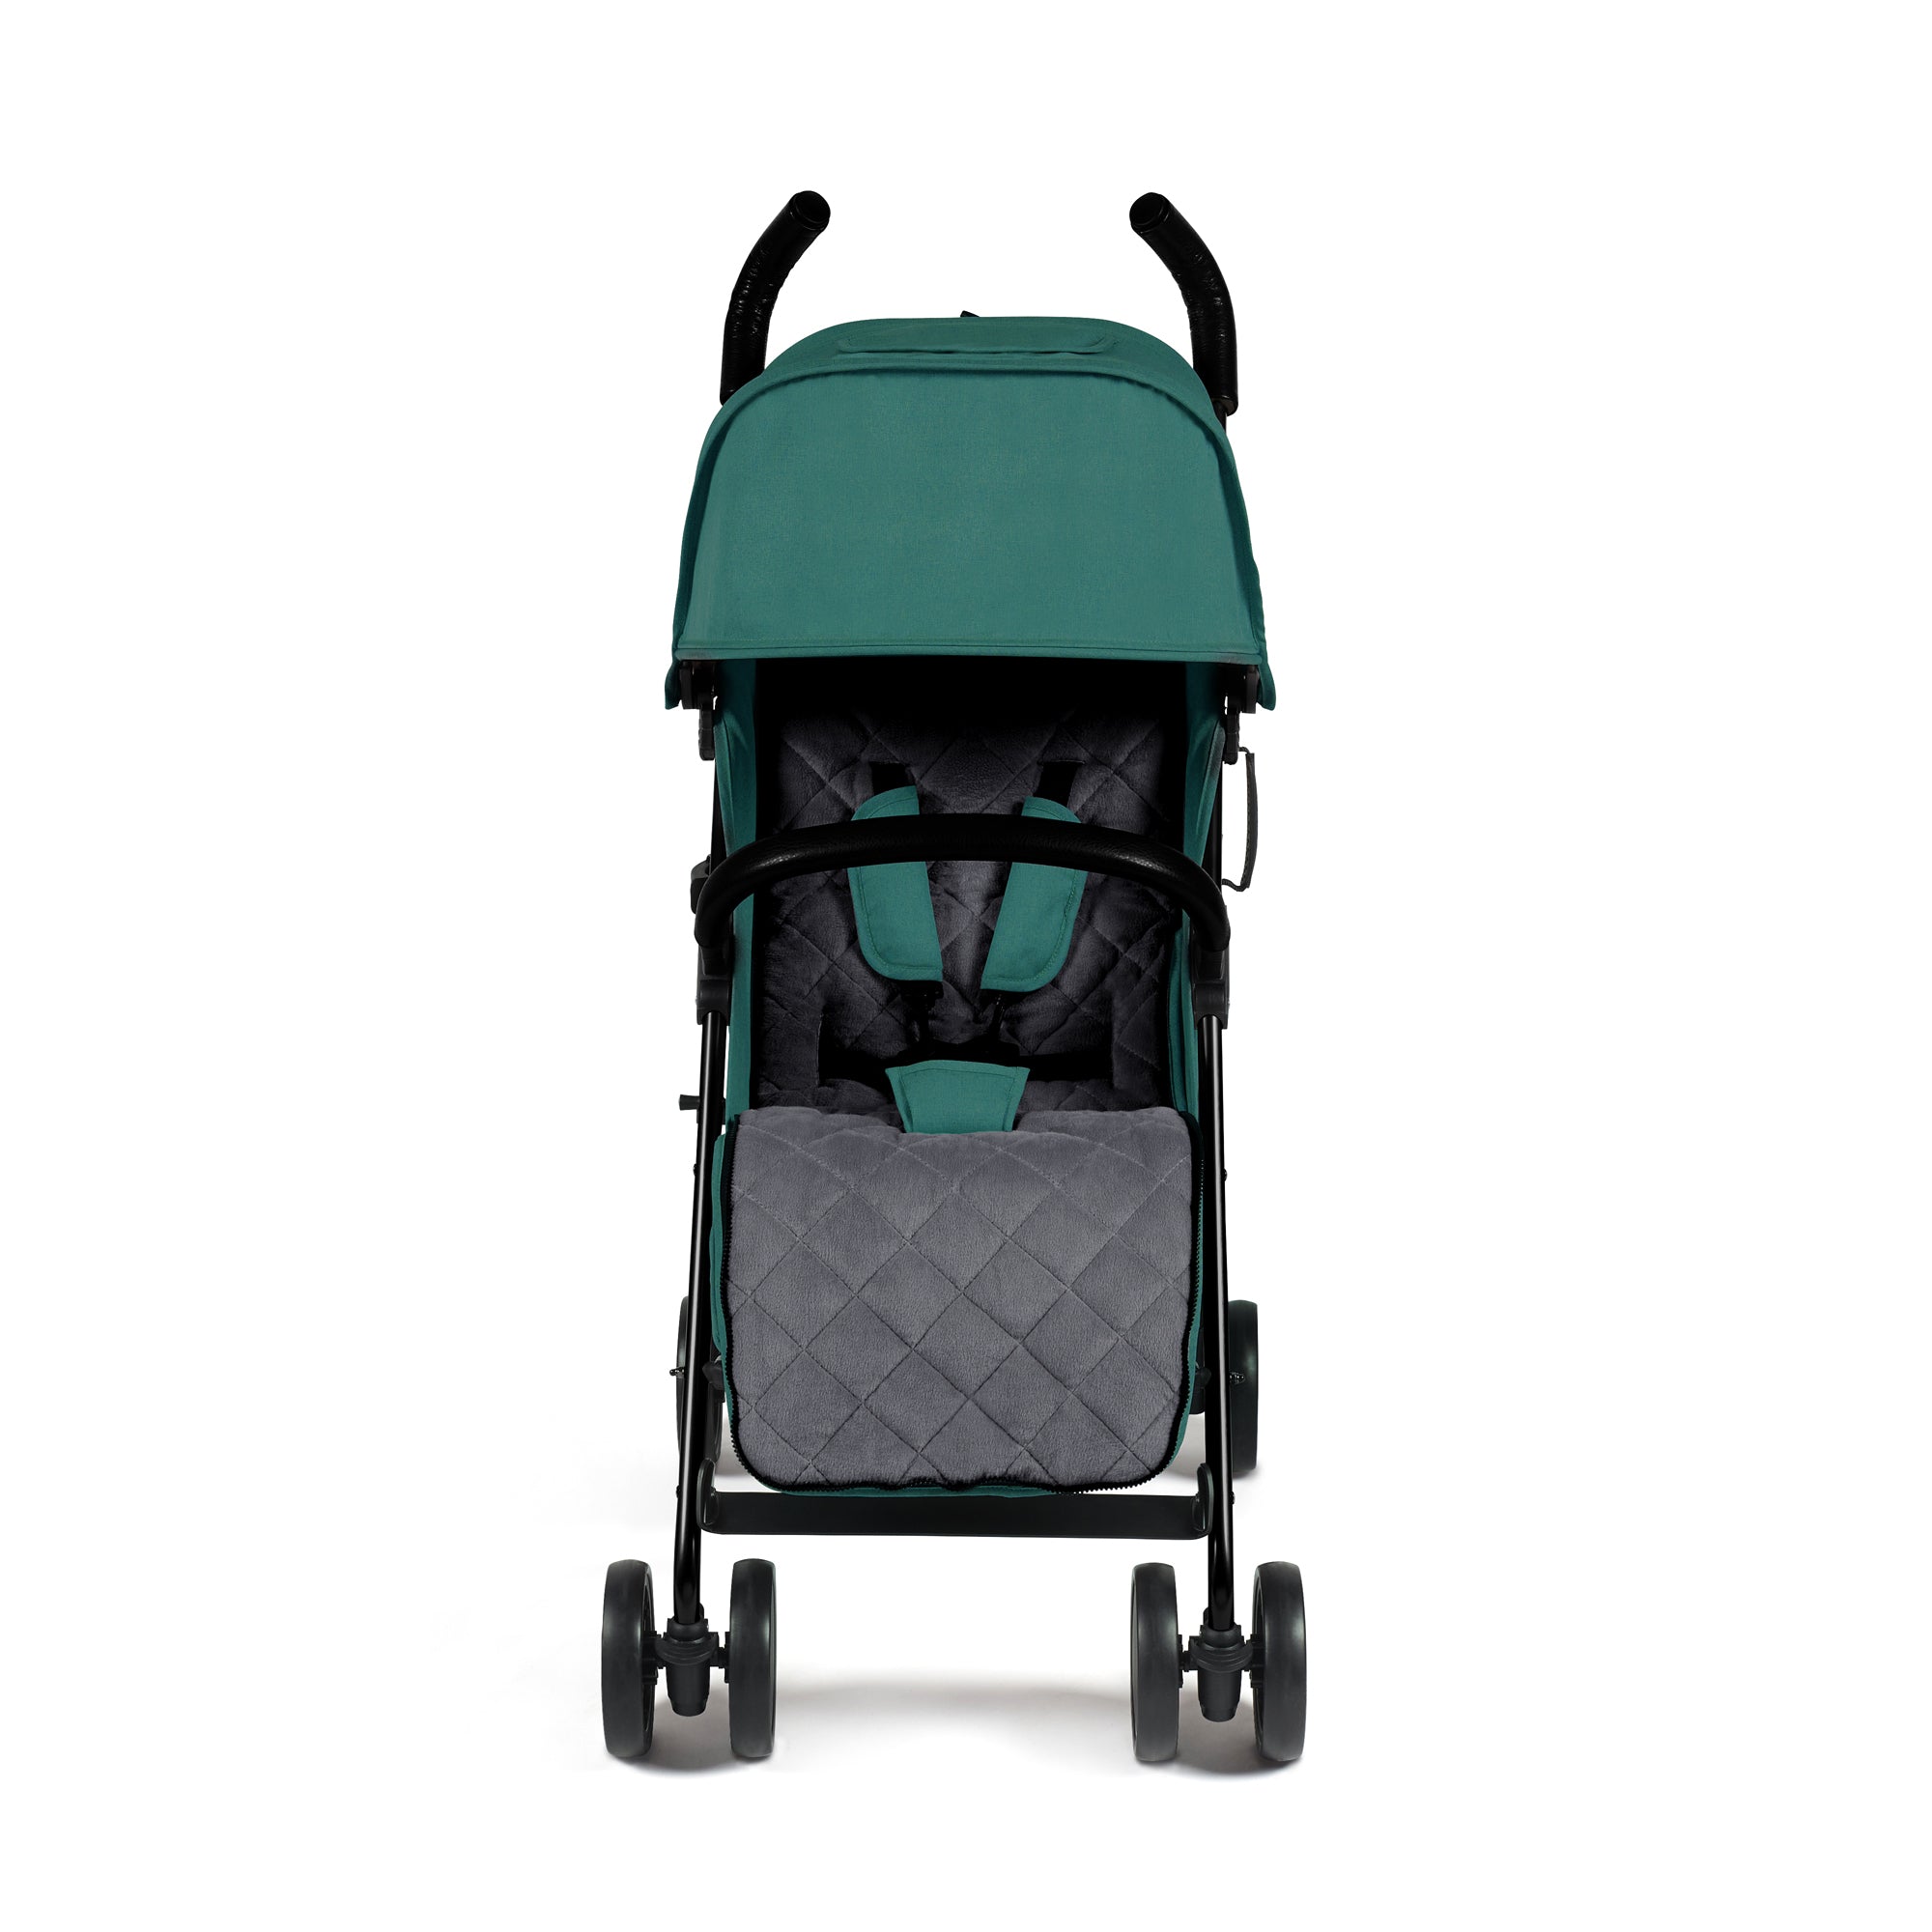 Ickle Bubba Discovery Prime Stroller